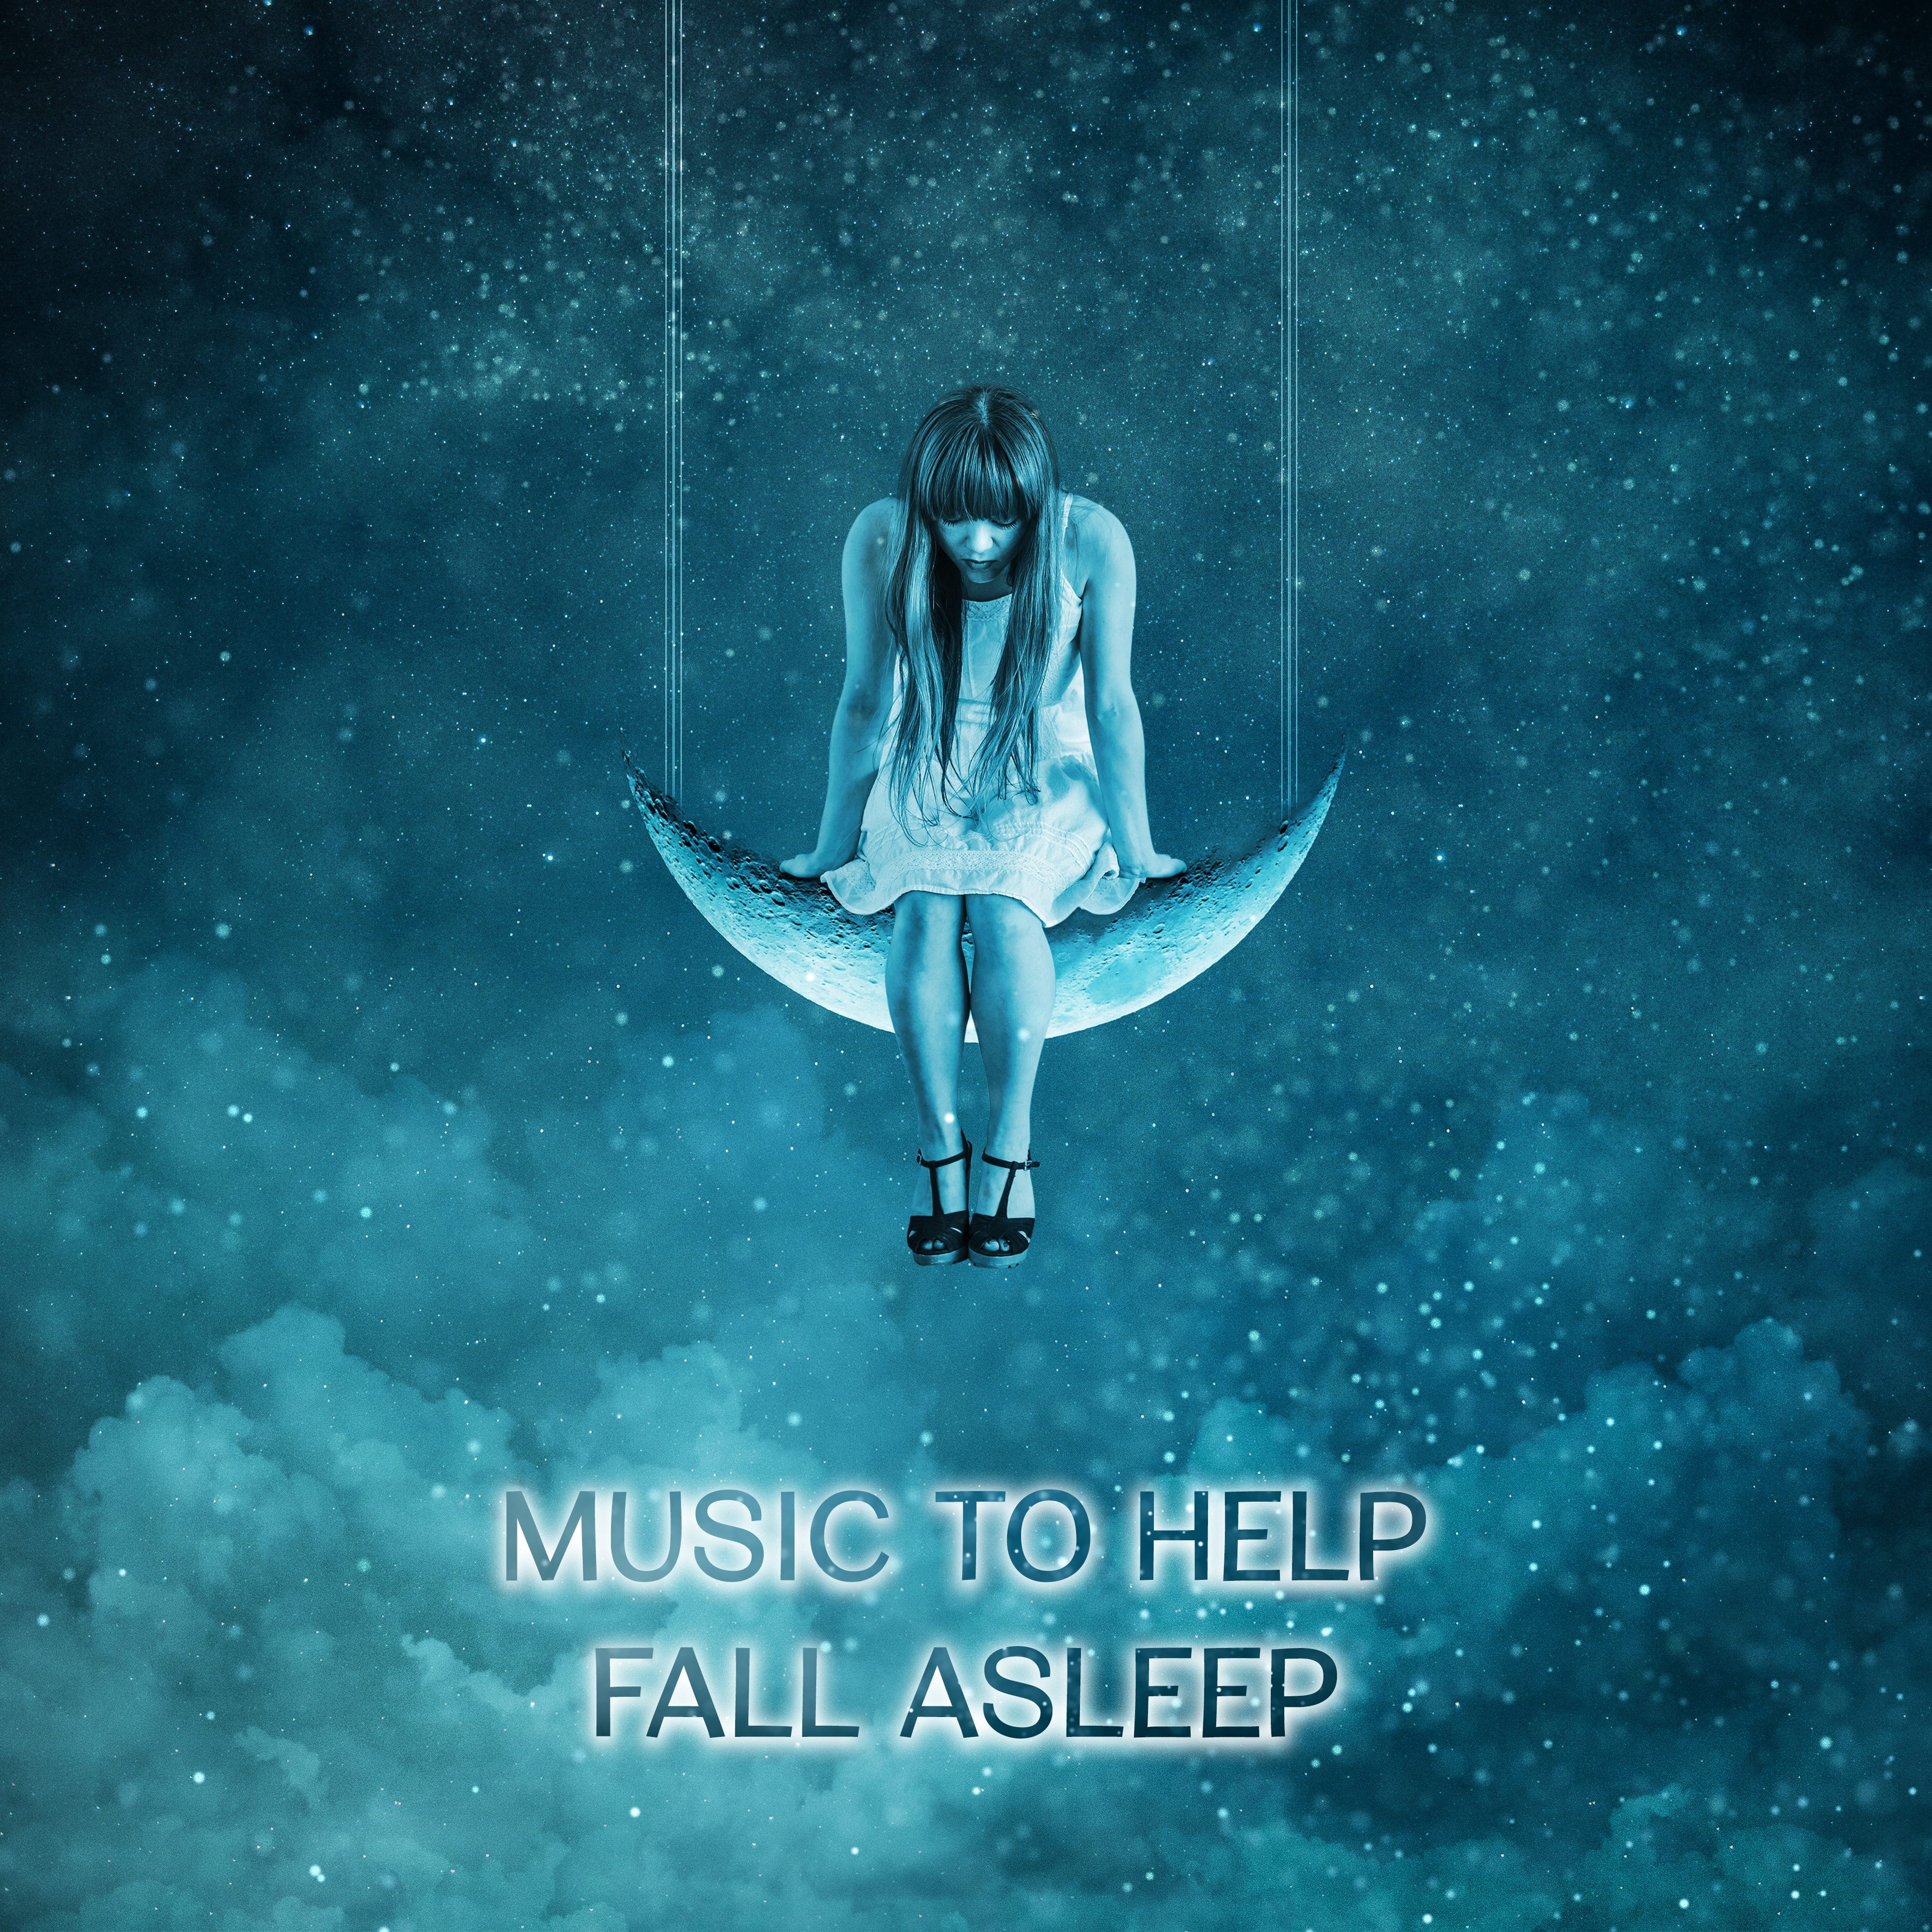 Music to Help Fall Asleep – Soft Sounds to Relax, New Age Dreaming, Sleeping Waves, Healing Therapy